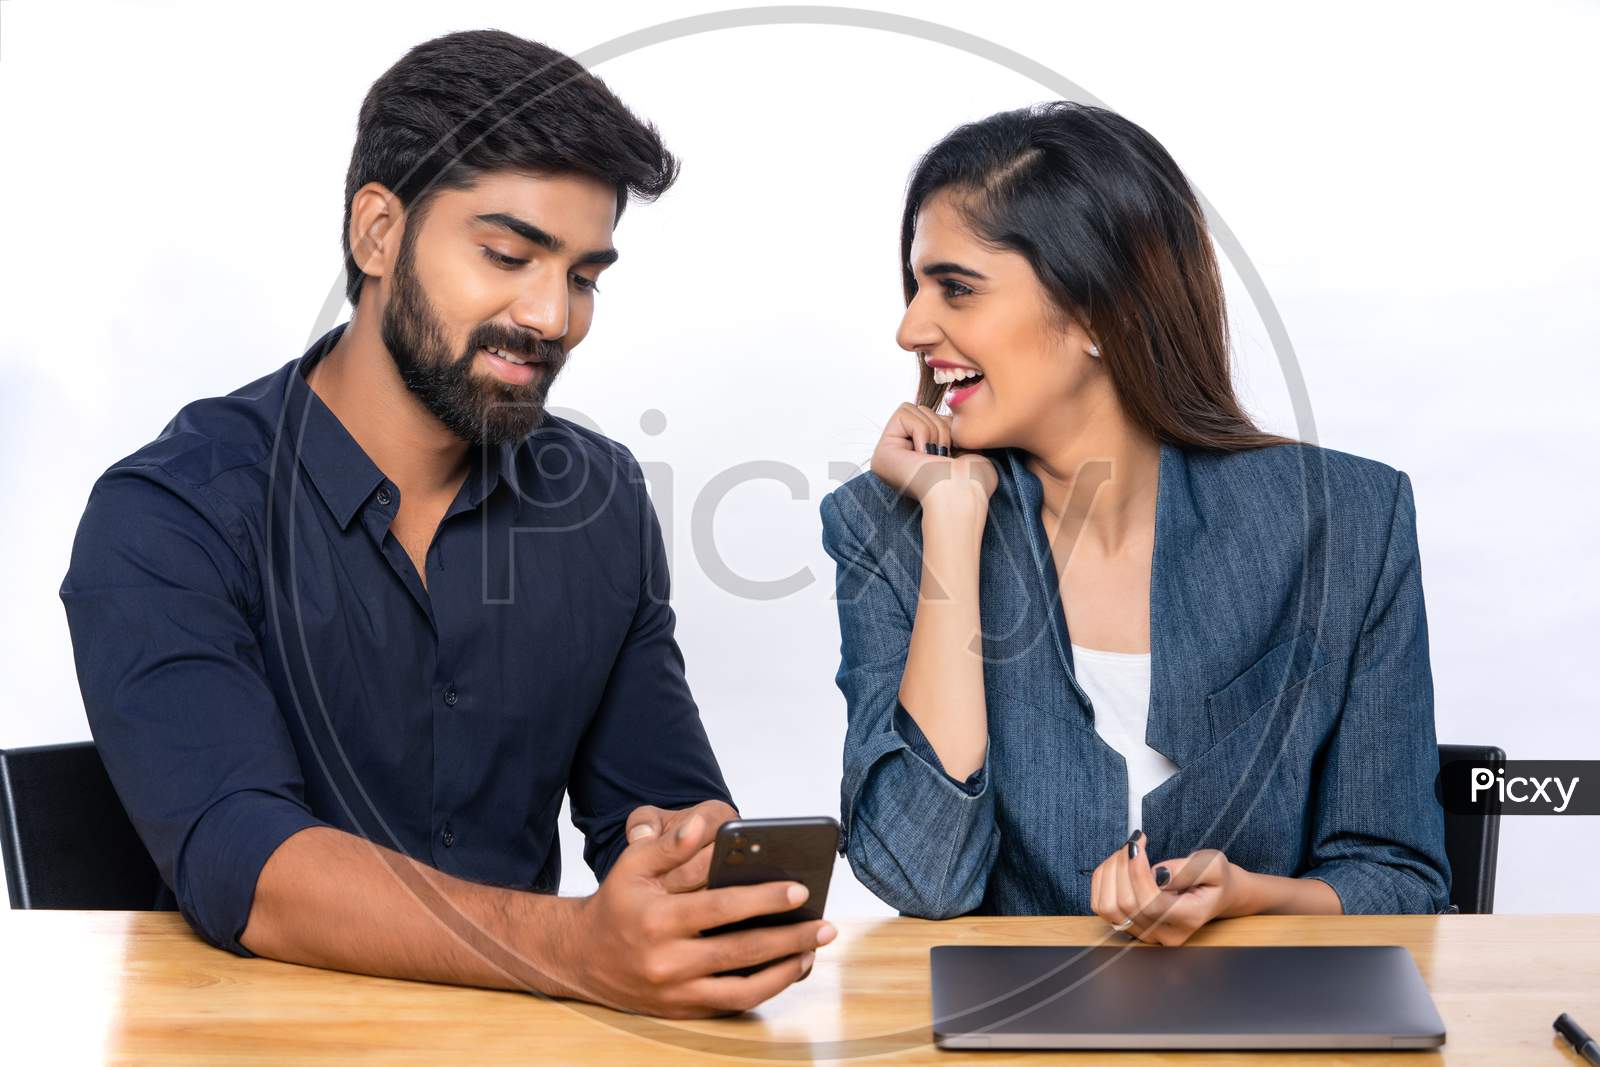 Indian working colleagues discussing and gesturing wile browsing on a mobile